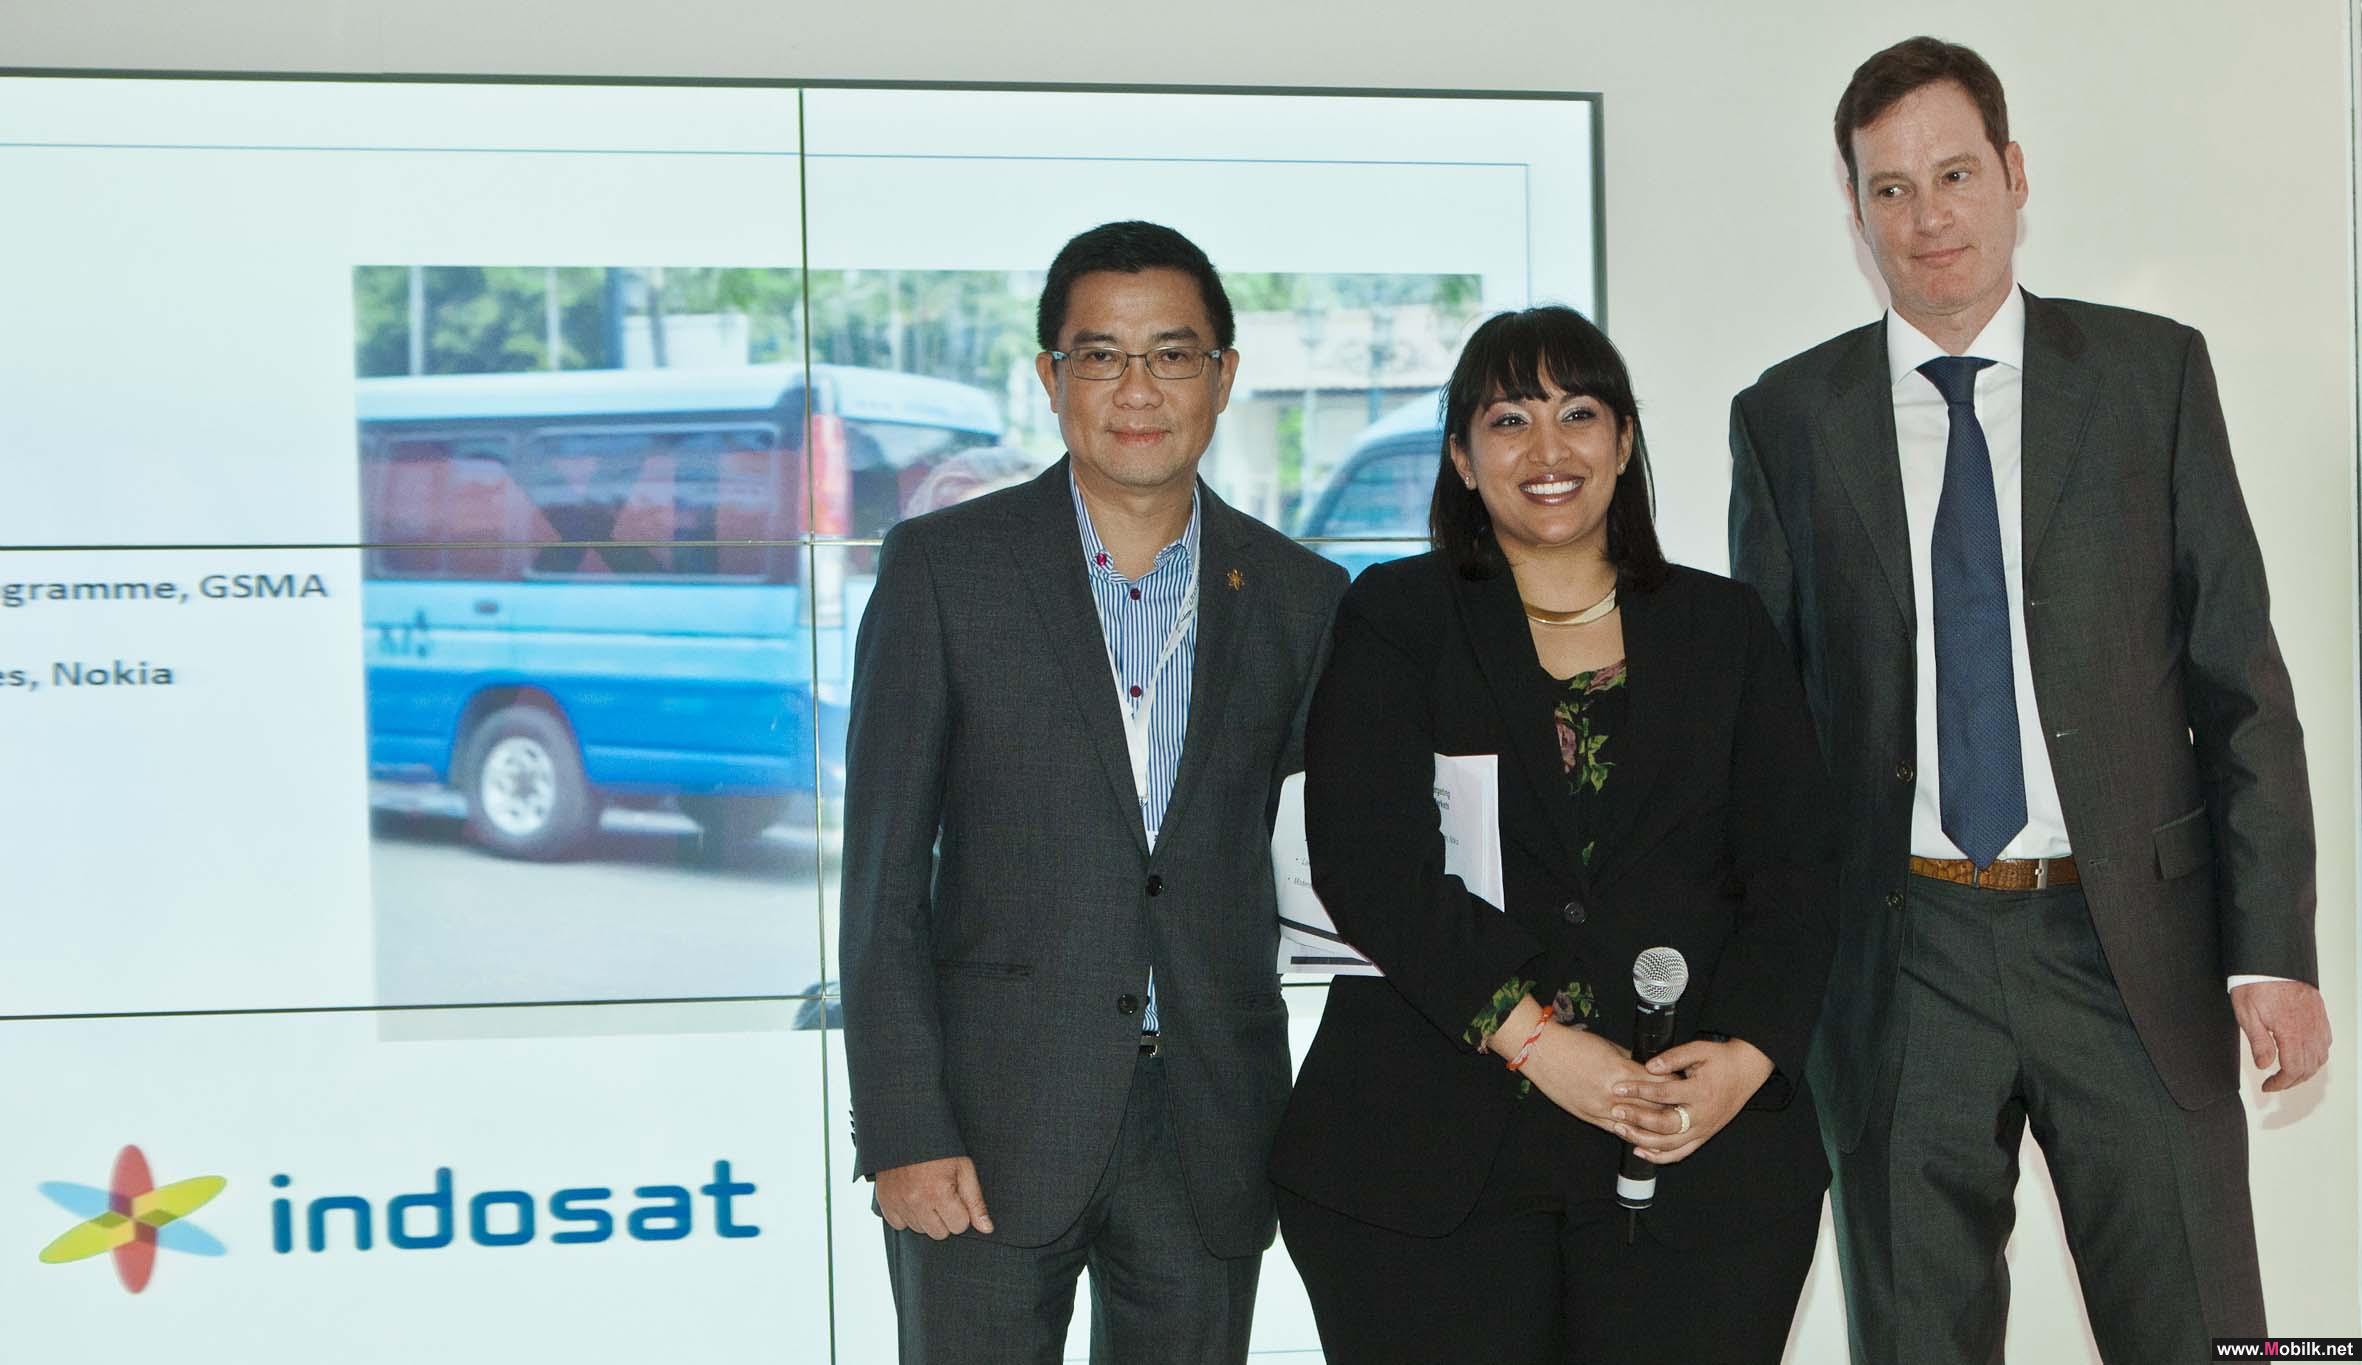 Indosat announces collaboration with Nokia as part of the GSMA mWomen Programme